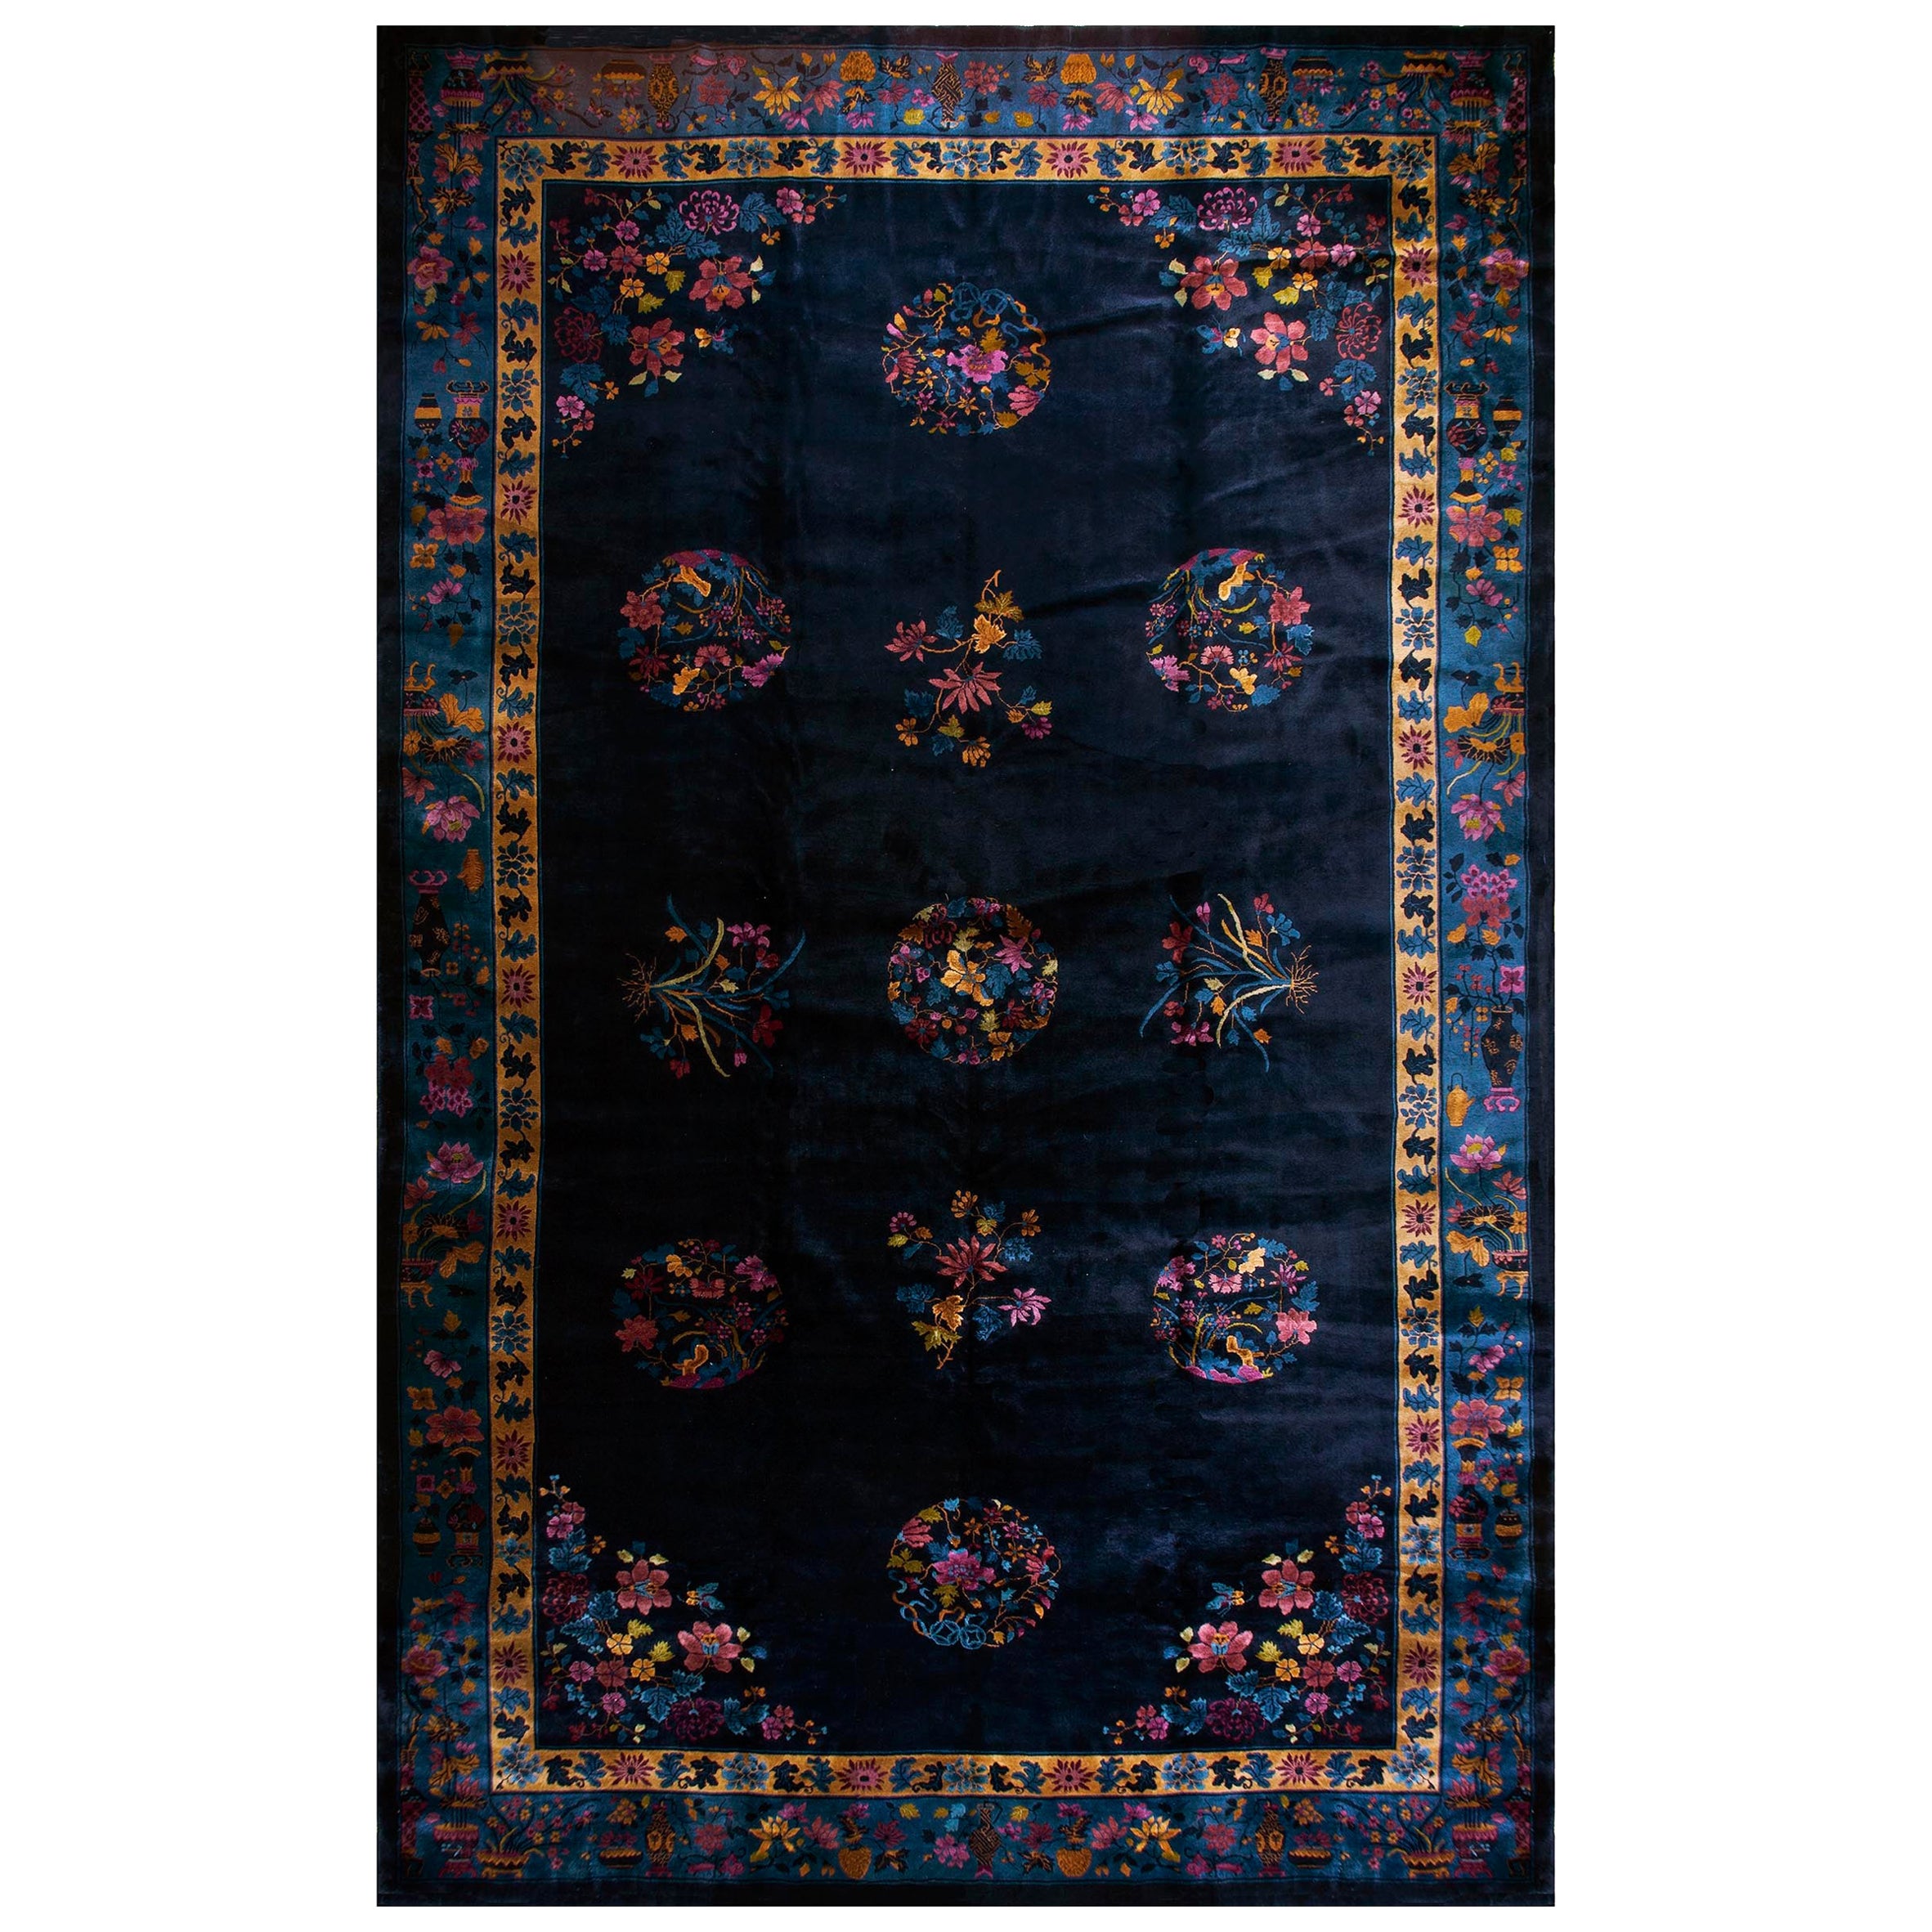 1920s Chinese Art Deco Carpet (  12'5" x 20'3" - 380 x 618 ) For Sale